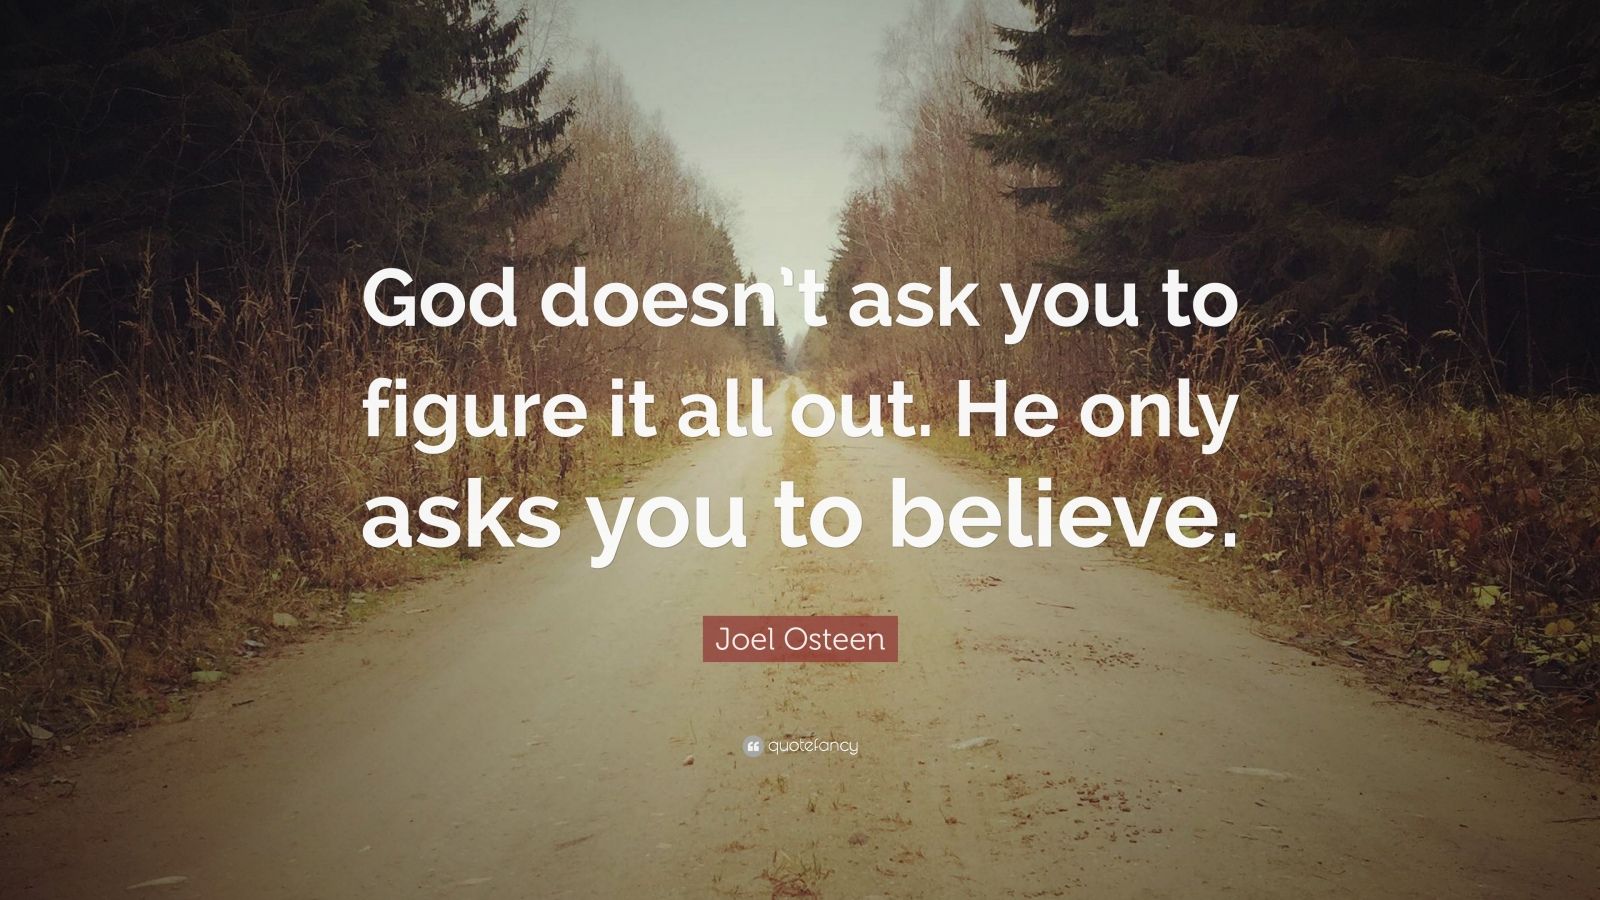 Joel Osteen Quote: “God doesn’t ask you to figure it all out. He only ...